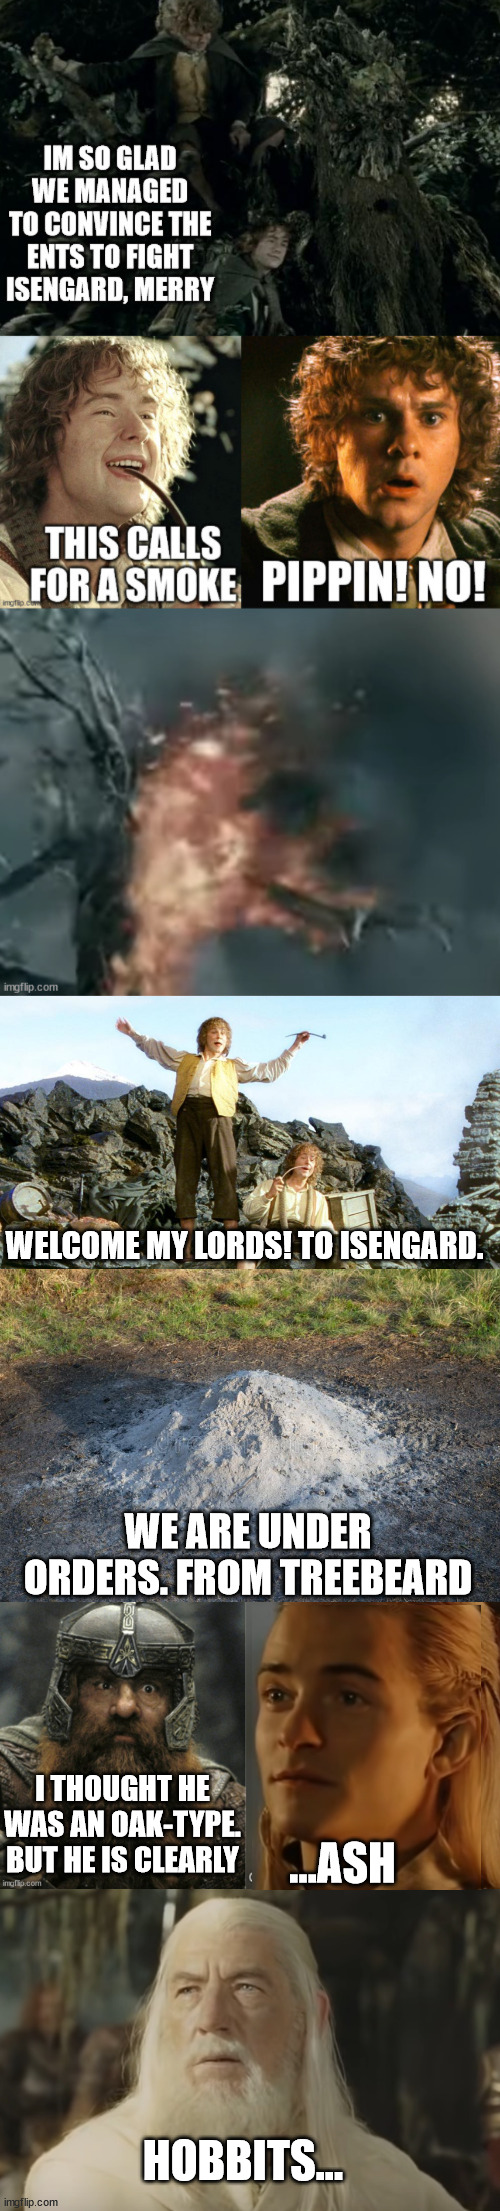 Hobbits | WELCOME MY LORDS! TO ISENGARD. WE ARE UNDER ORDERS. FROM TREEBEARD; ...ASH; I THOUGHT HE WAS AN OAK-TYPE. BUT HE IS CLEARLY; HOBBITS... | image tagged in hobbits,lord of the rings,merry and pippin,legolas,gandalf | made w/ Imgflip meme maker